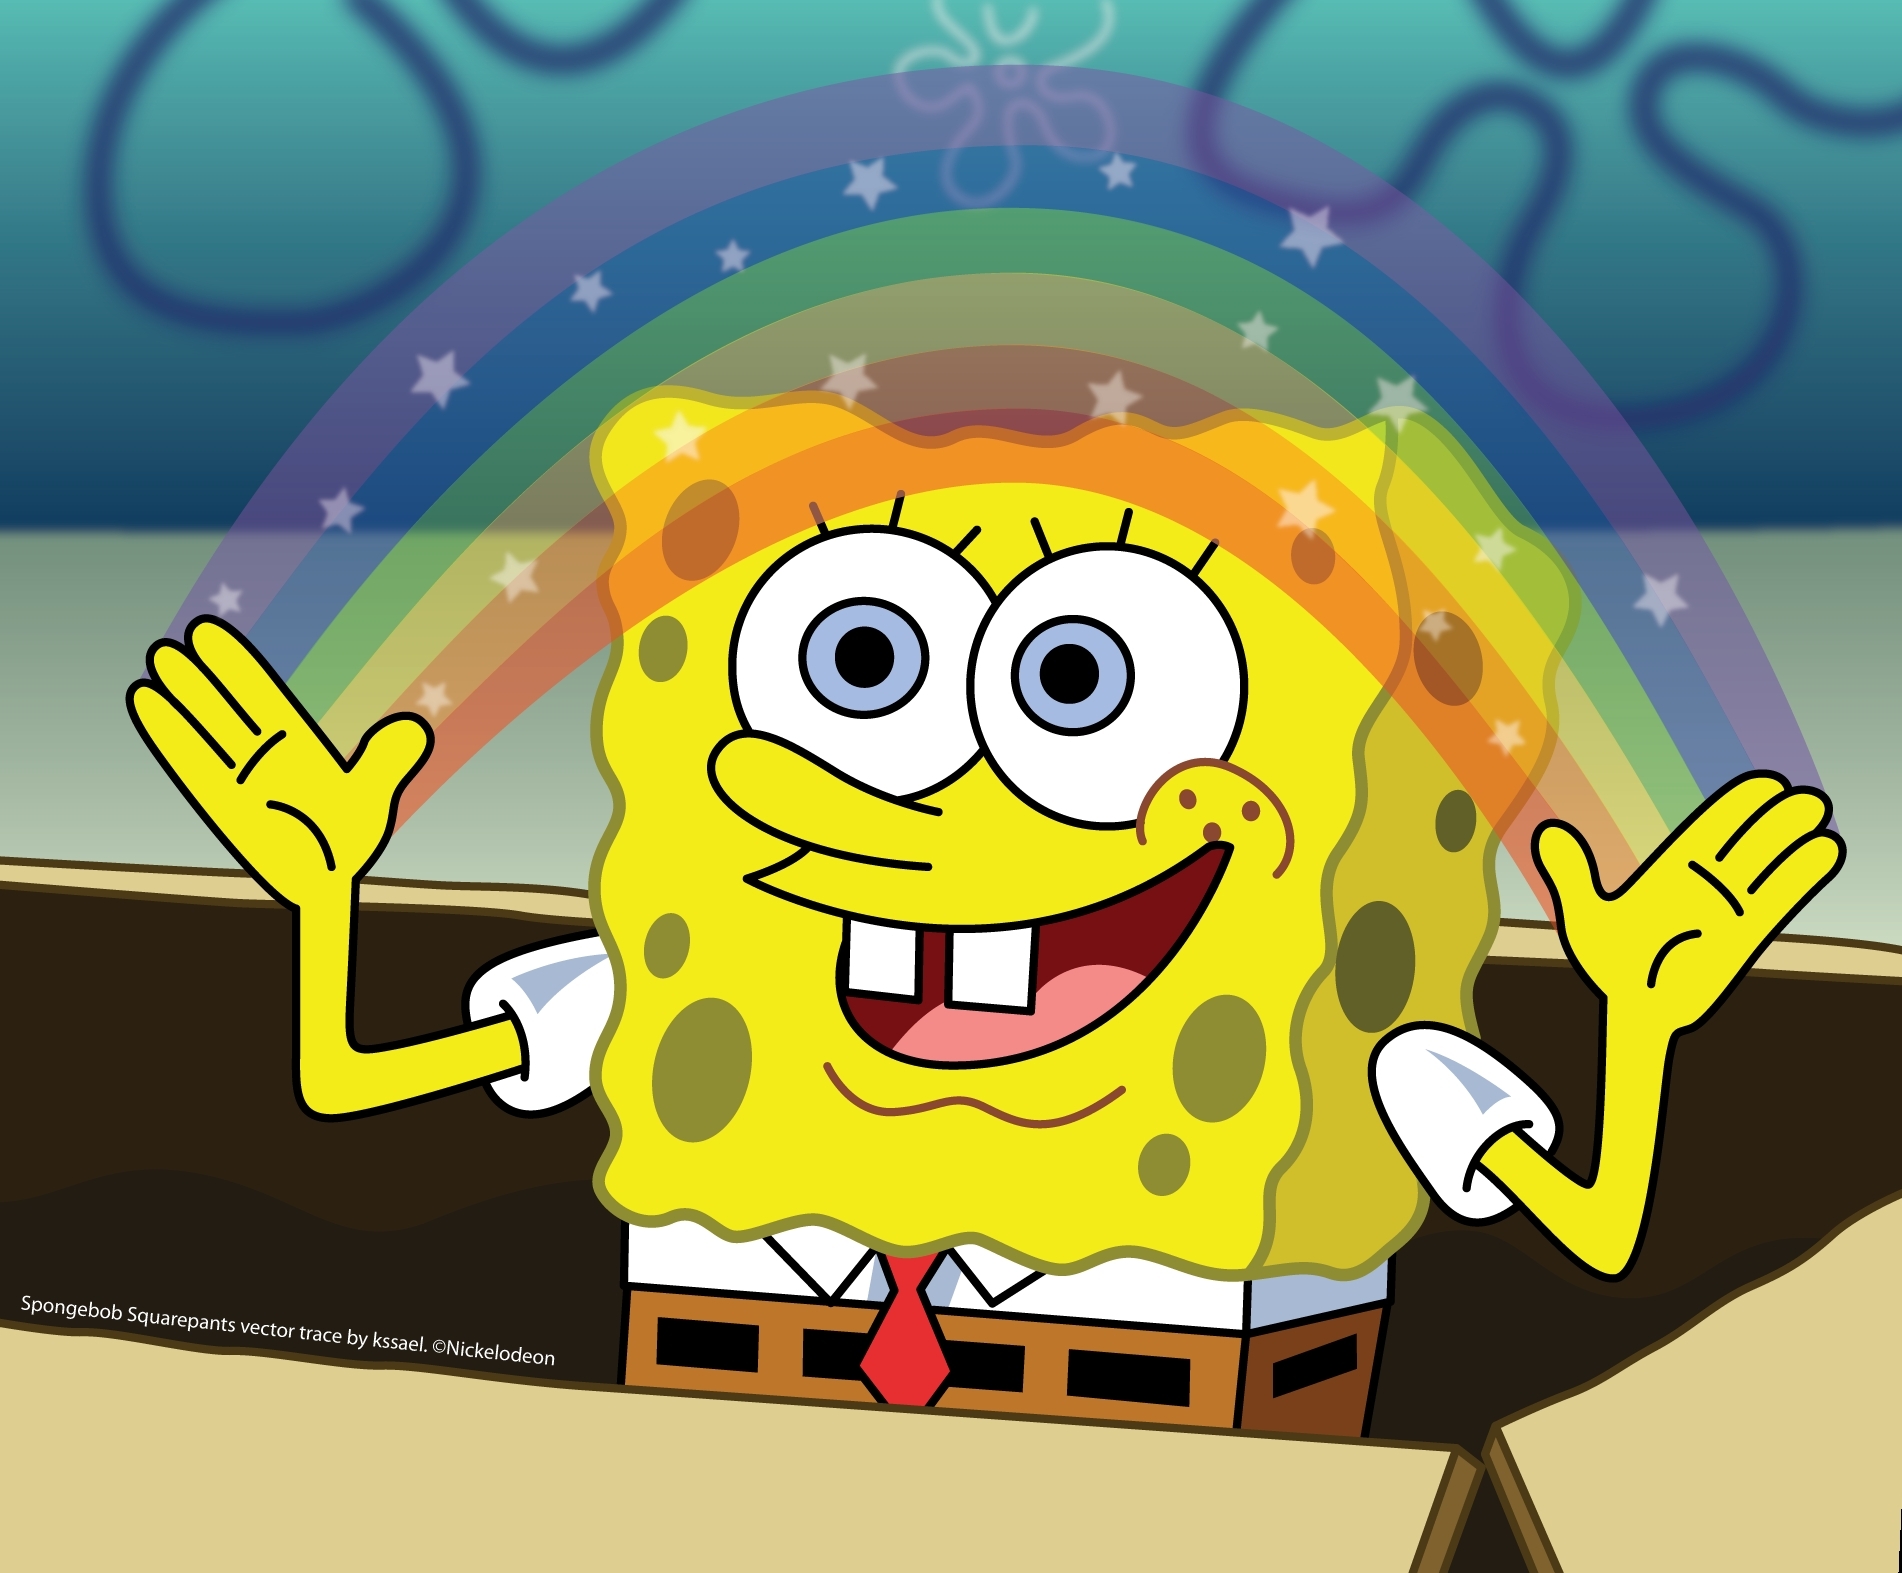 Fun Facts 10 Things You Probably Didn T Know About Spongebob Squarepants Hype Malaysia